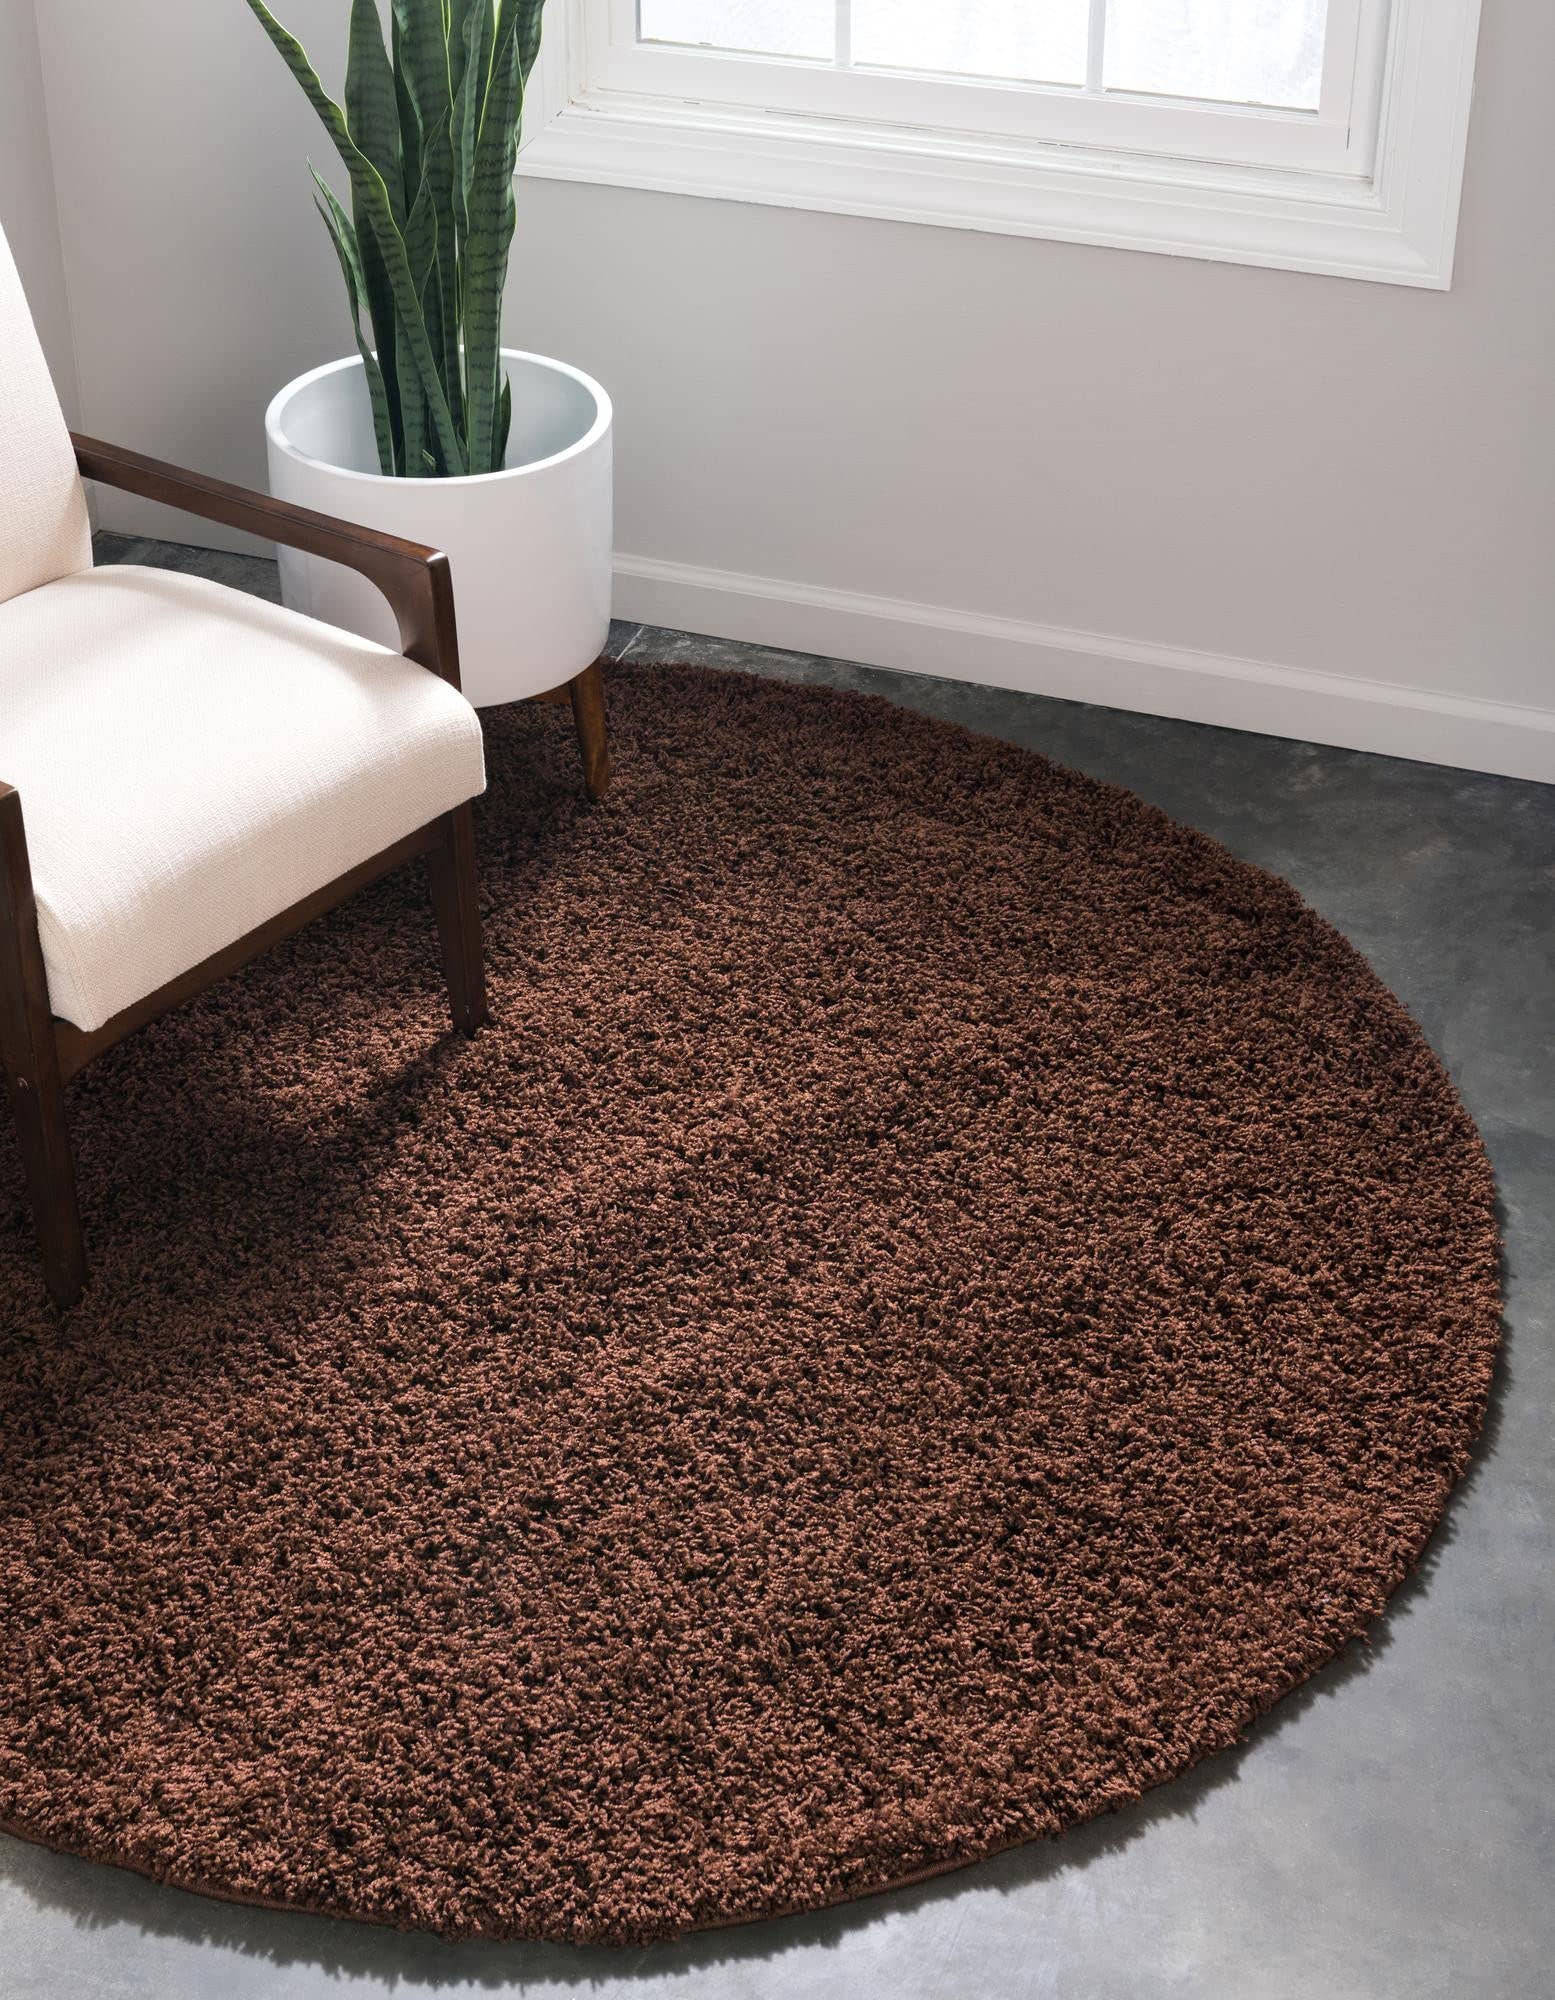 Unique Loom Solid Shag Collection Area Rug (8' Round, Chocolate Brown)